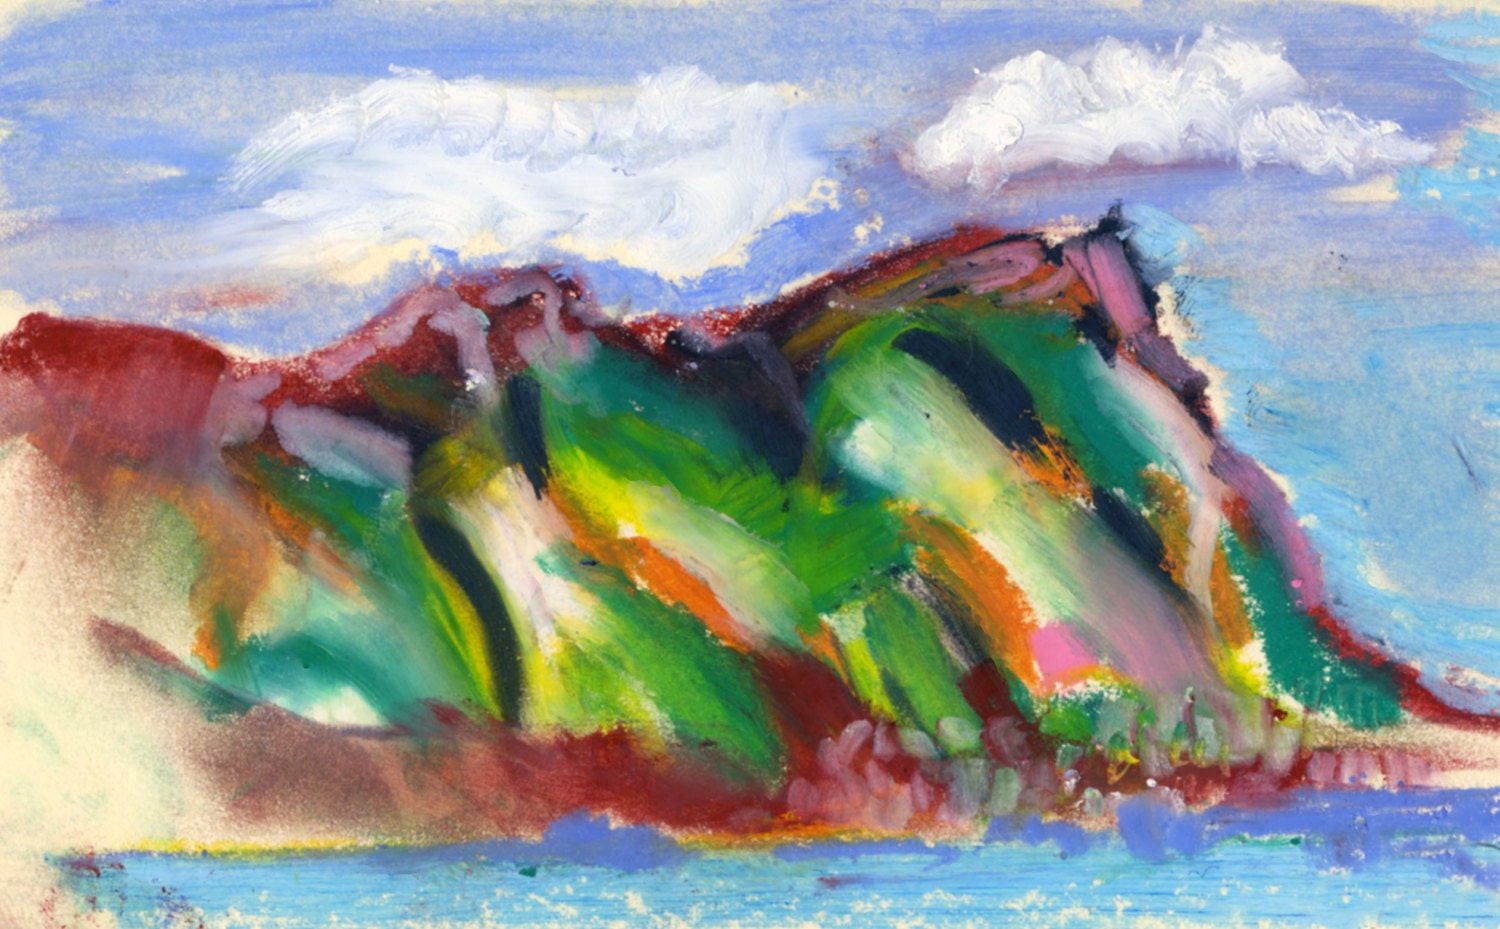 Wild Clouds flying over False Bay Mountain to the sea - vibrant Oil Pastel drawing. Limited Edition print one of only 25 - artsdesireable